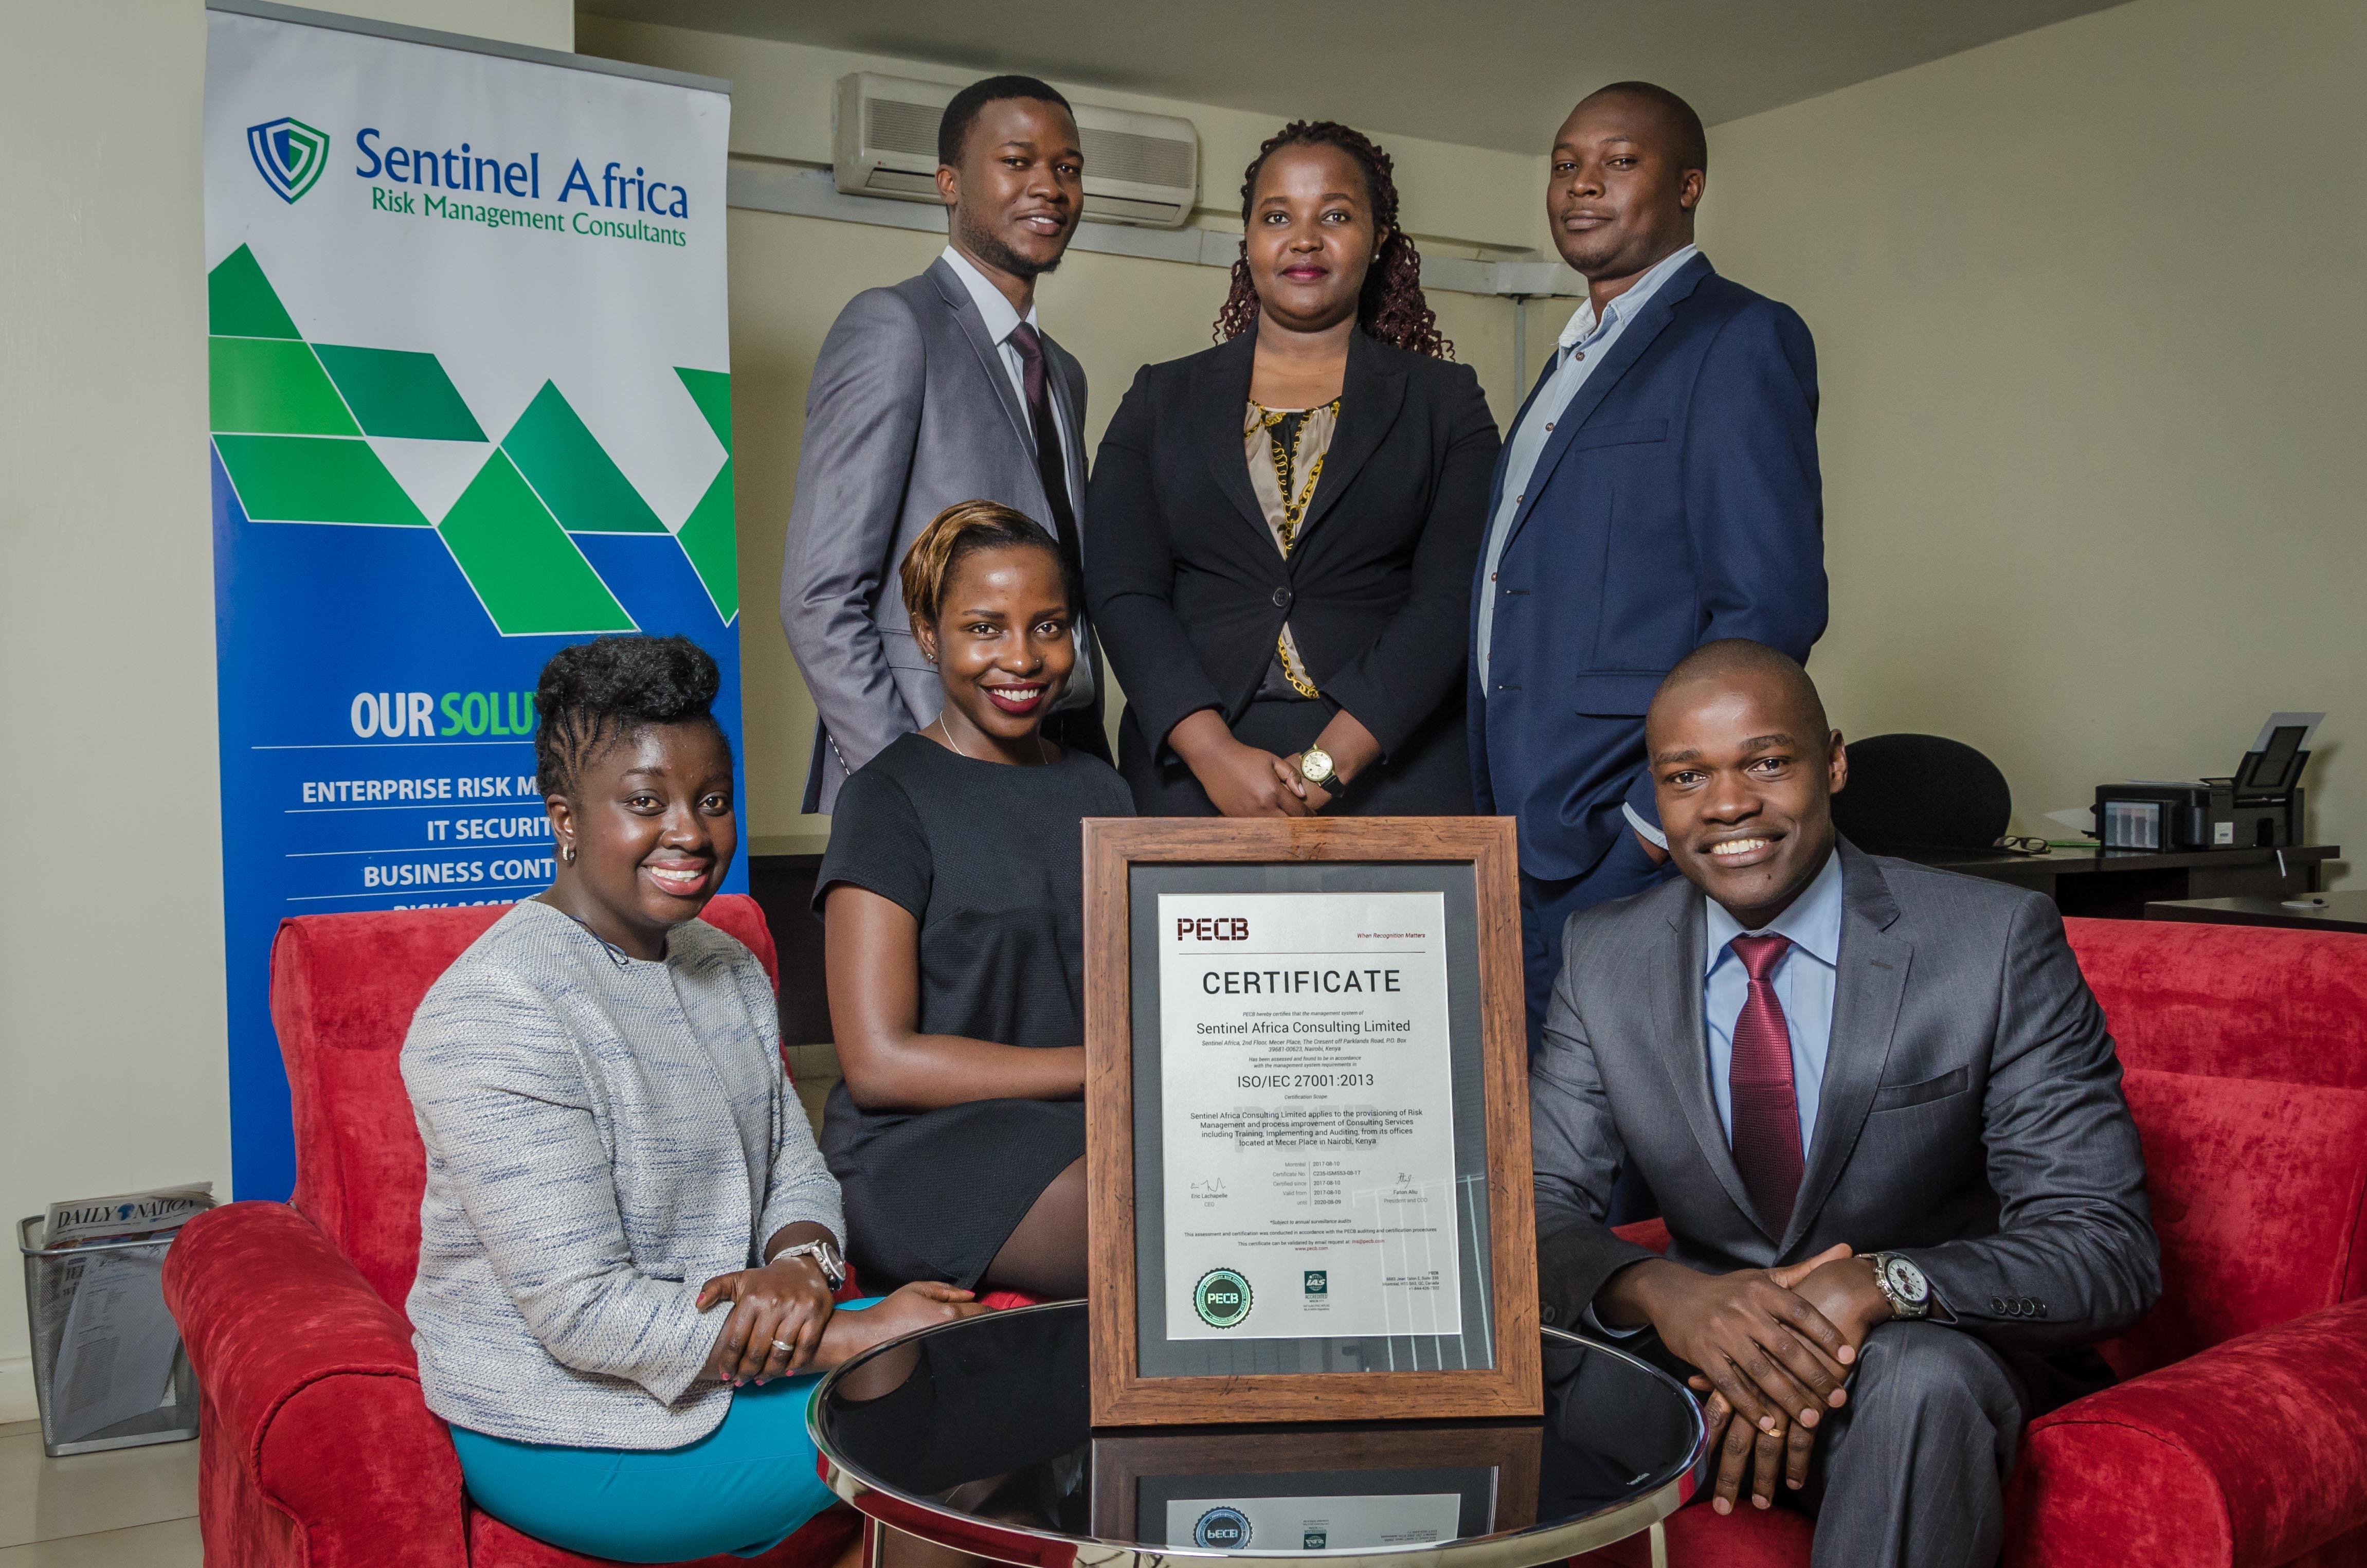 Sentinel Africa obtained the ISO 27001 Information Security certification